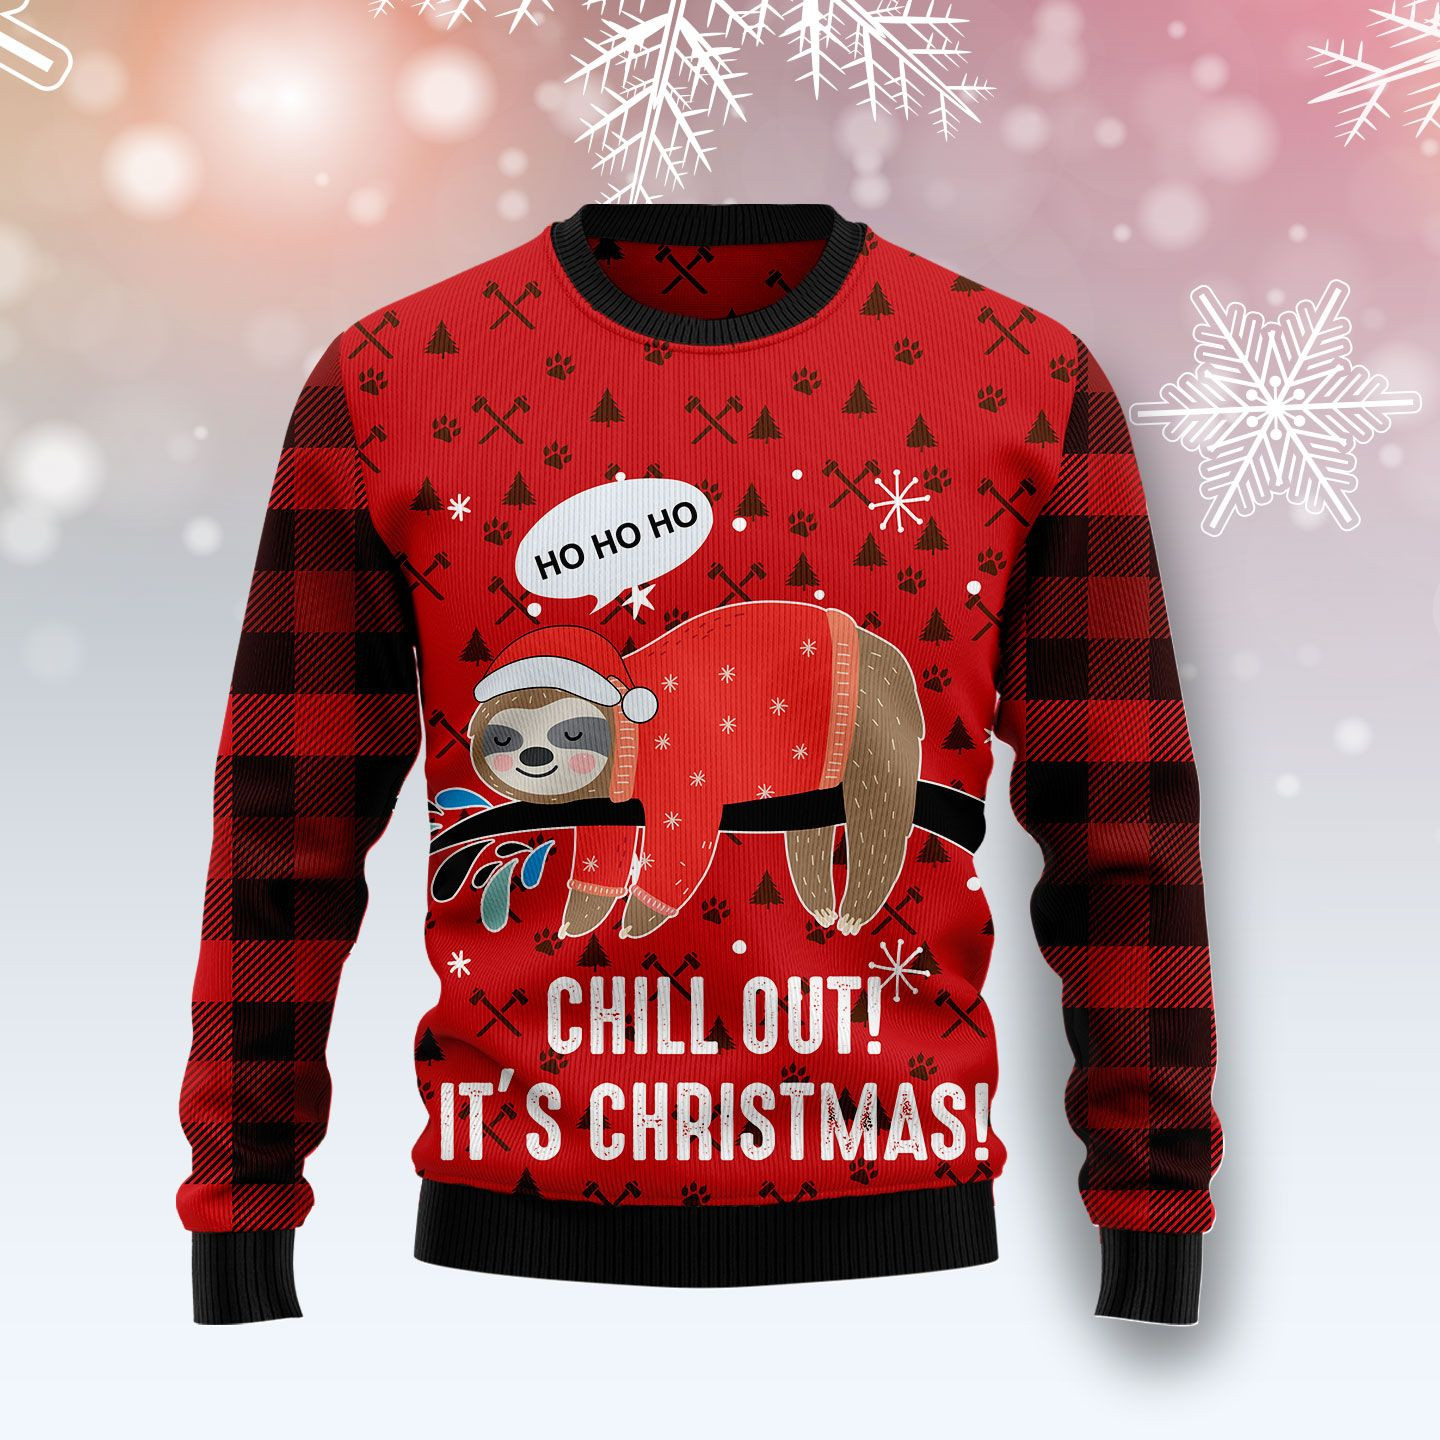 Sloth Chill Out Ugly Christmas Sweater Ugly Sweater For Men Women, Holiday Sweater